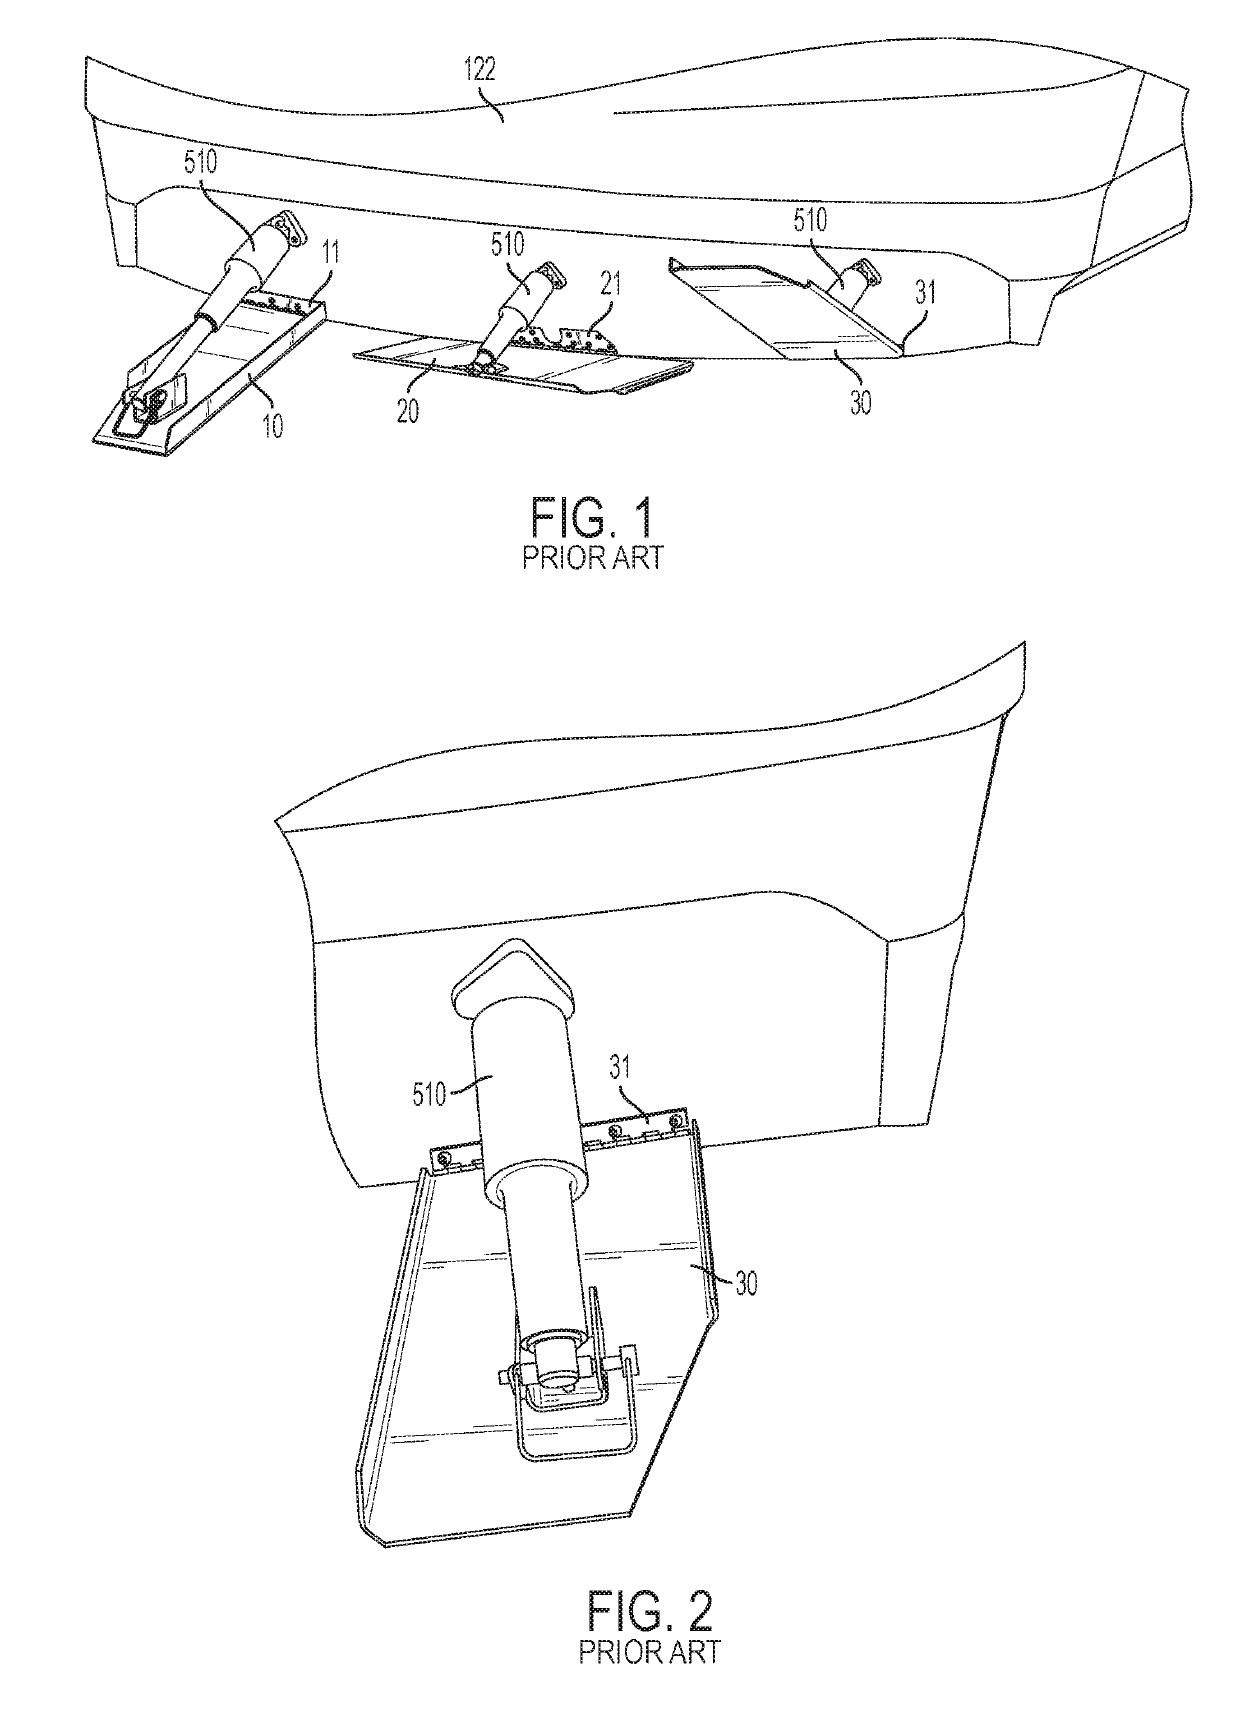 Wake-modifying device for a boat